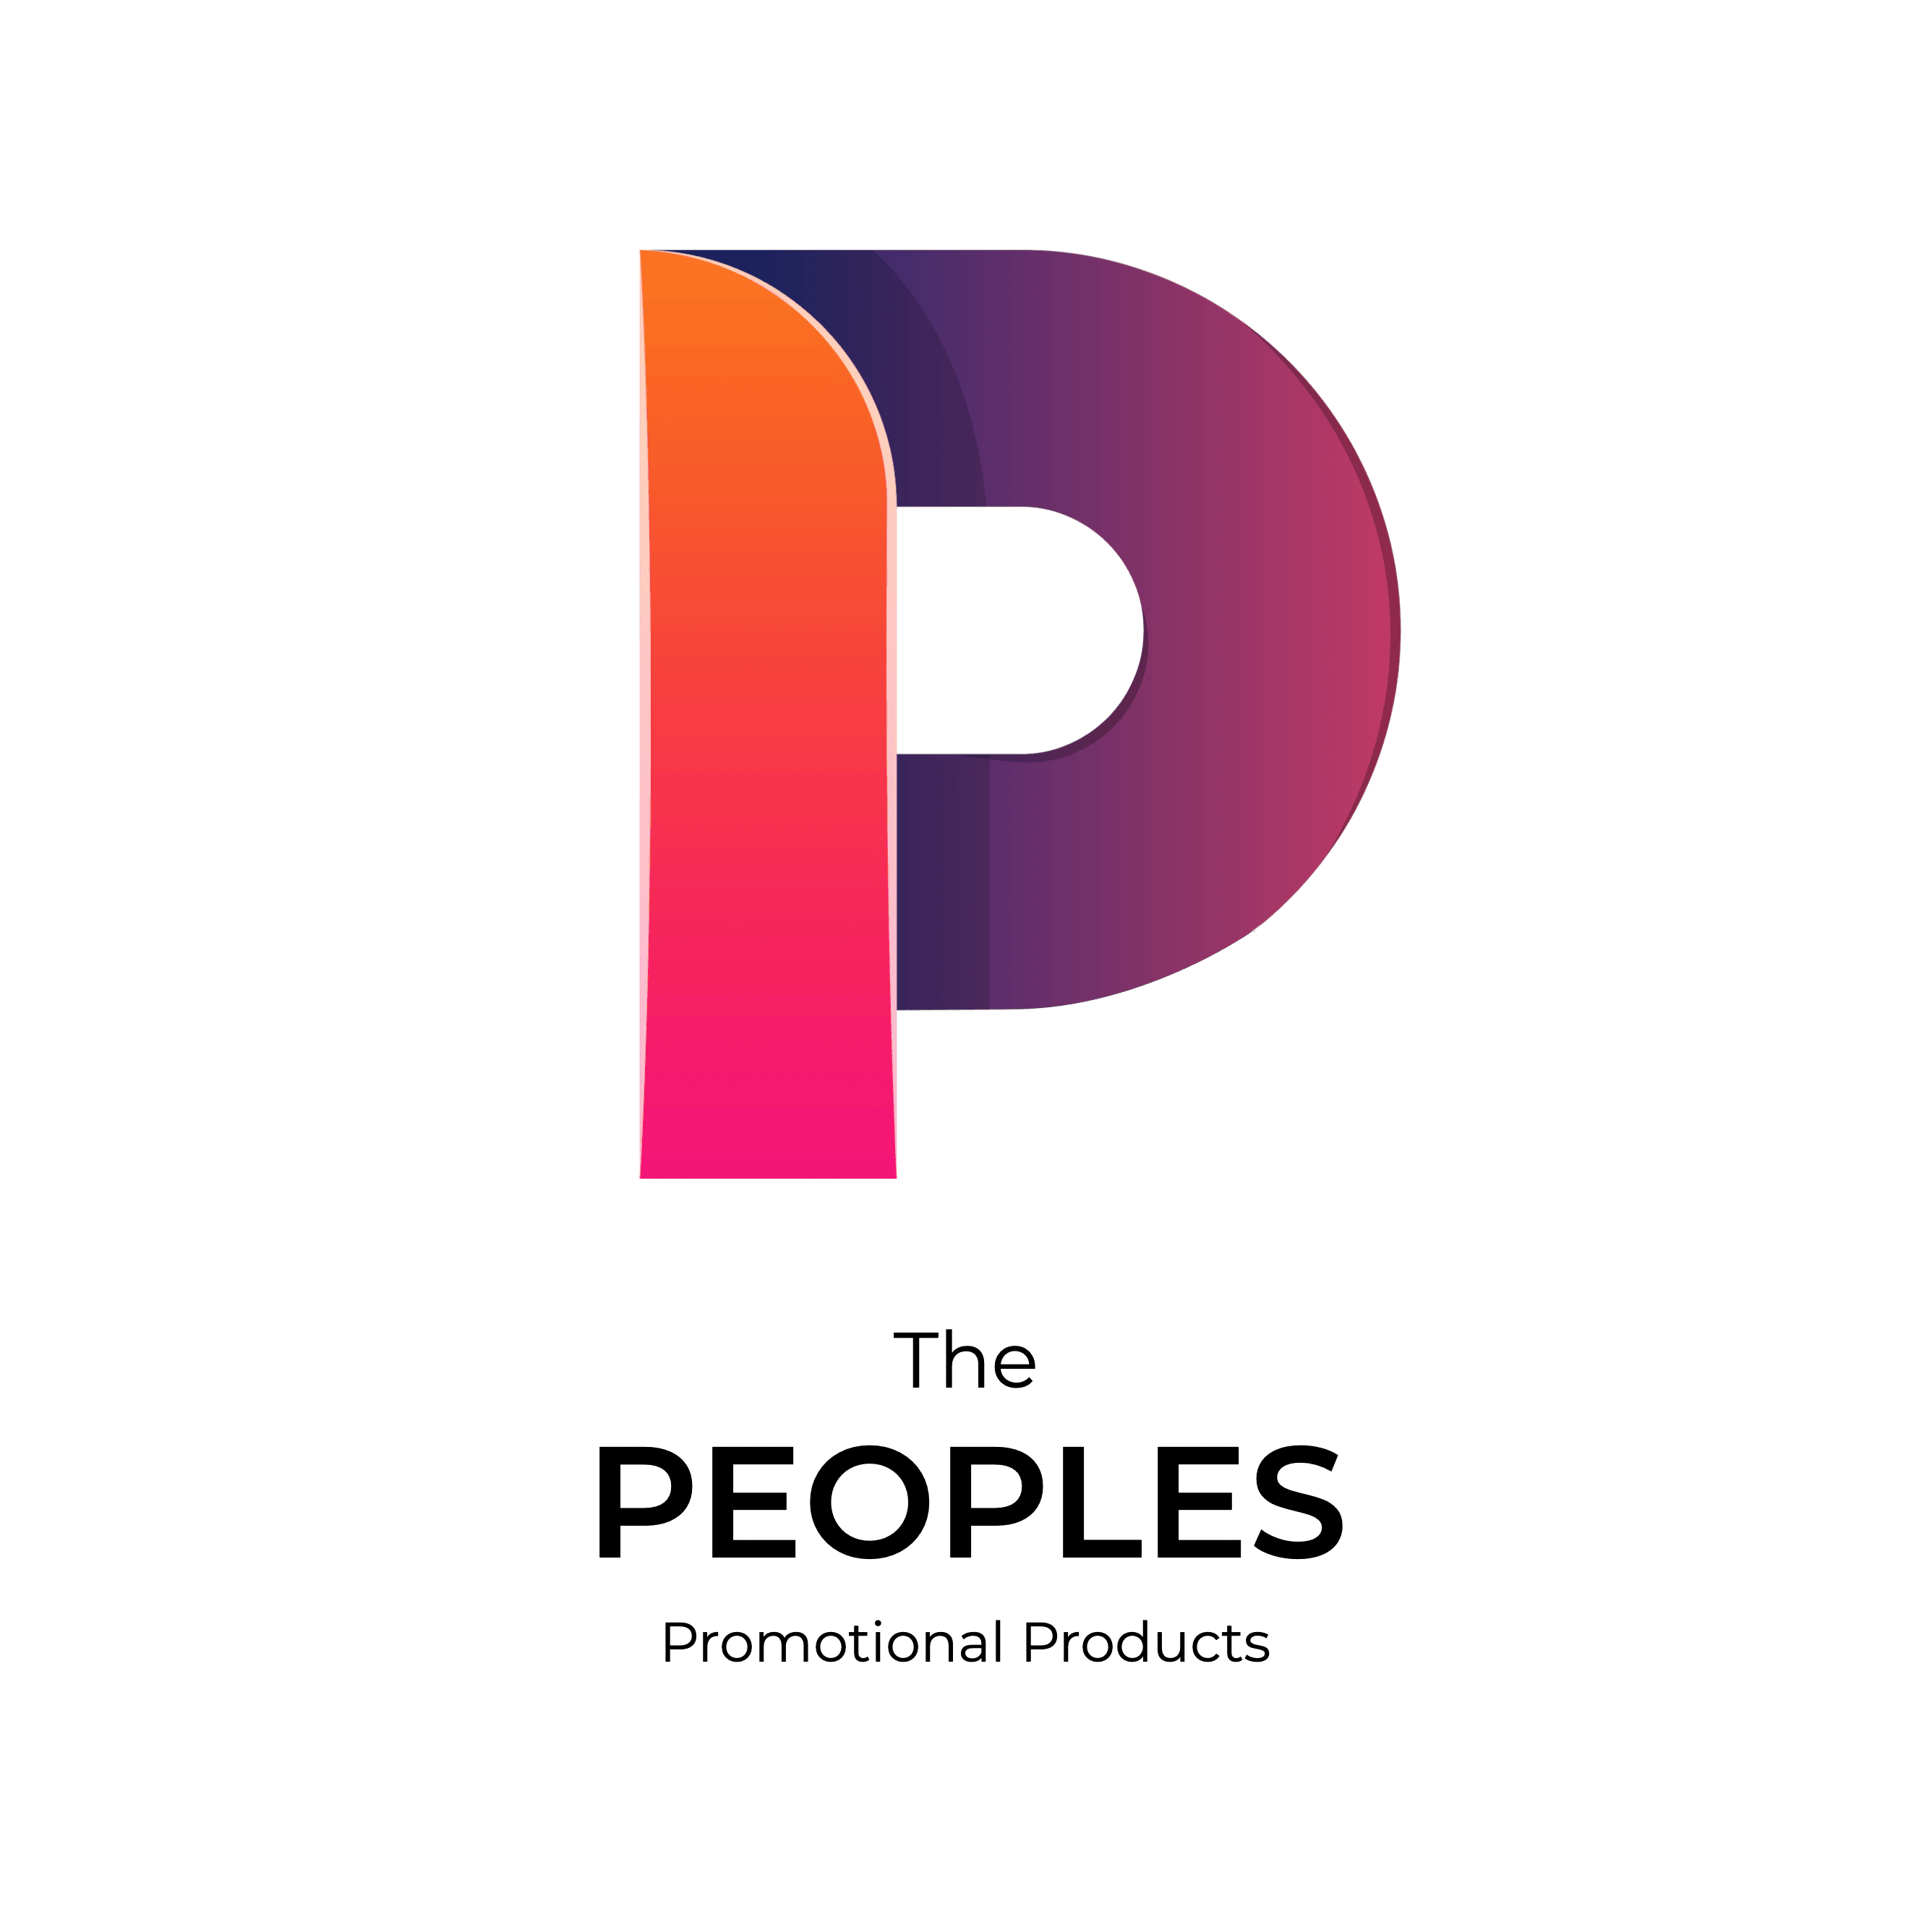 The People’s Promotional Products